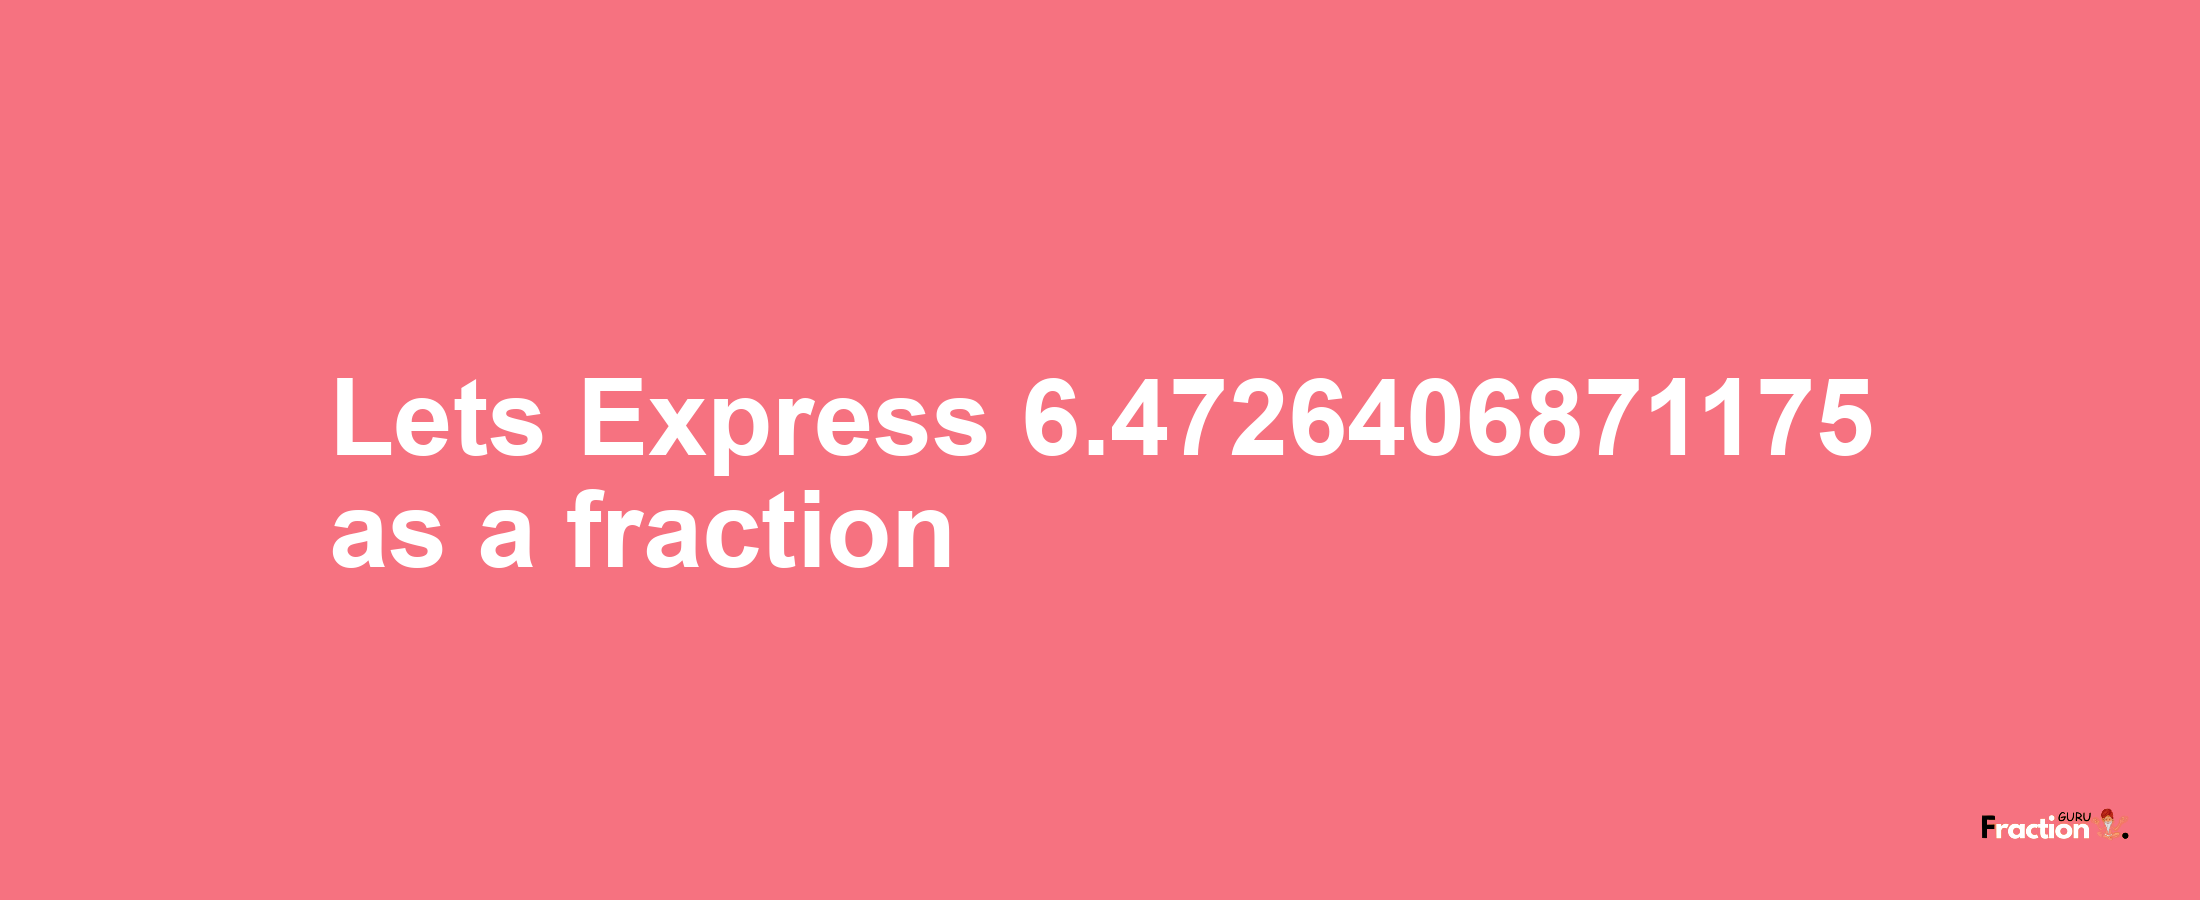 Lets Express 6.4726406871175 as afraction